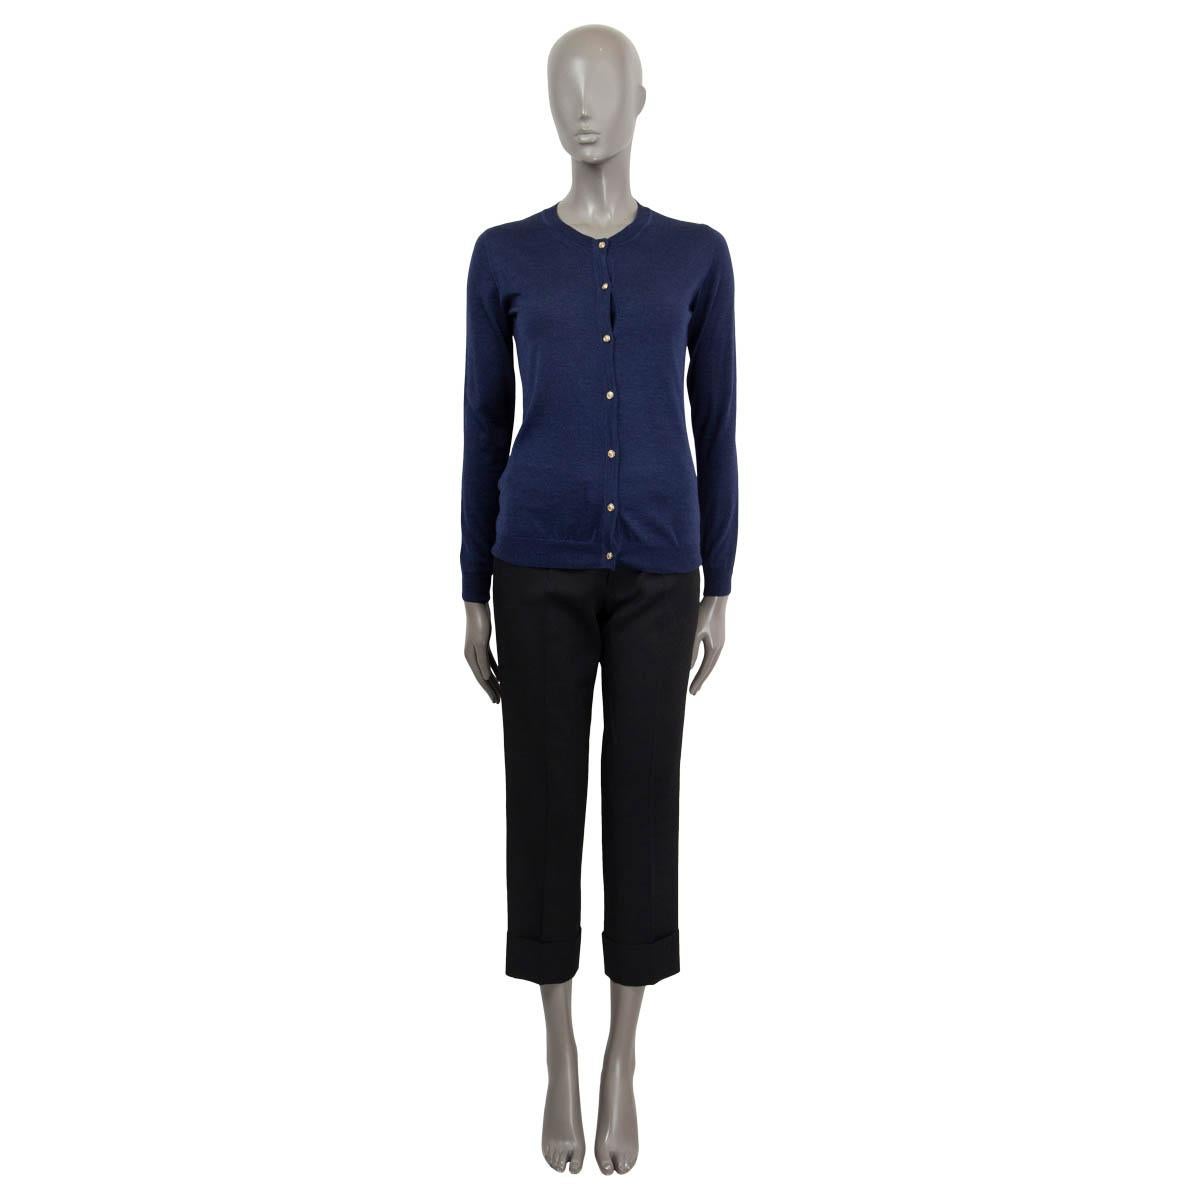 100% authentic Versace round-neck fine-knit cardigan in navy cashmere (70%) and silk (30%). Features silver-tone medusa buttons. Has been worn and is in excellent condition.

Measurements
Tag Size	40
Size	S
Shoulder Width	35cm (13.7in)
Bust